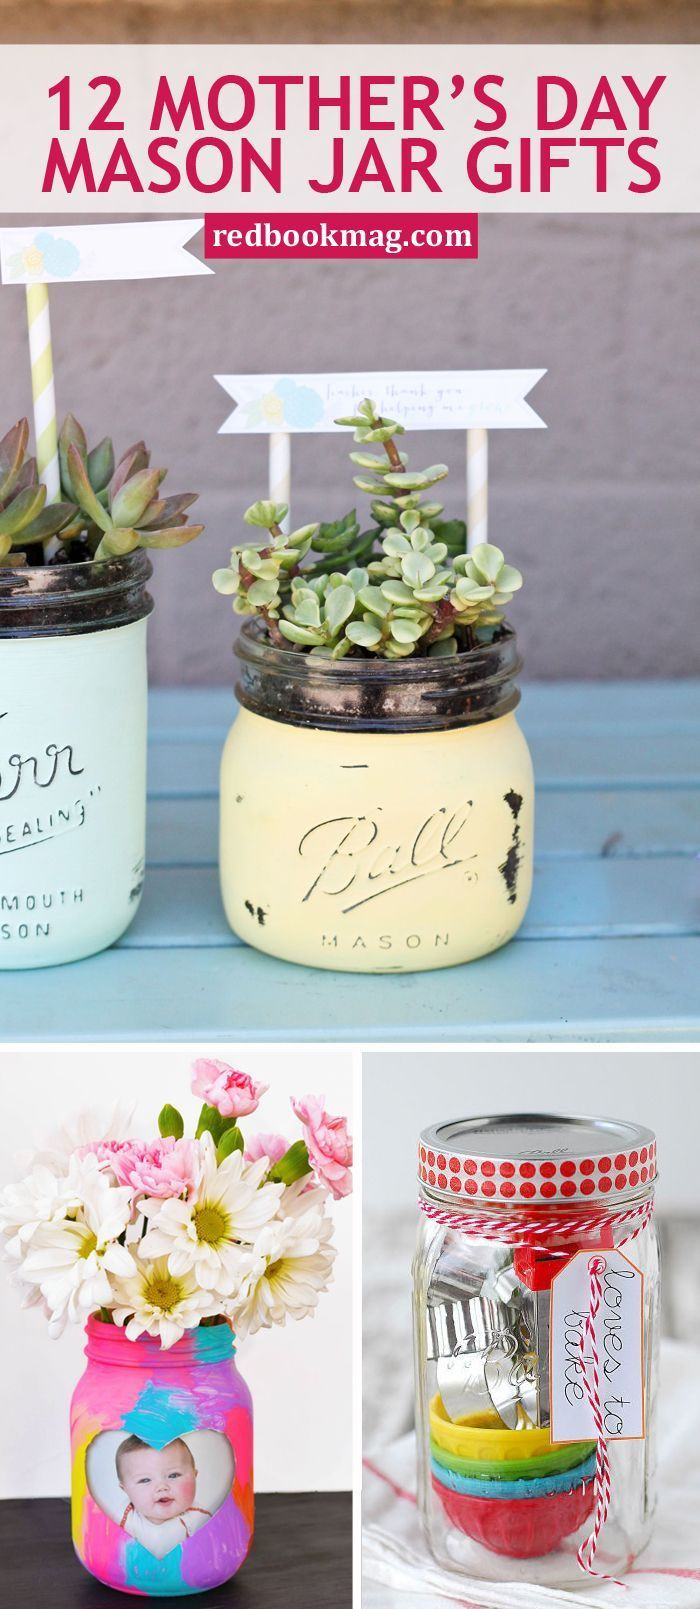 Mother'S Day Gift Ideas Diy
 34 Mother s Day Gifts That Belong In a Mason Jar